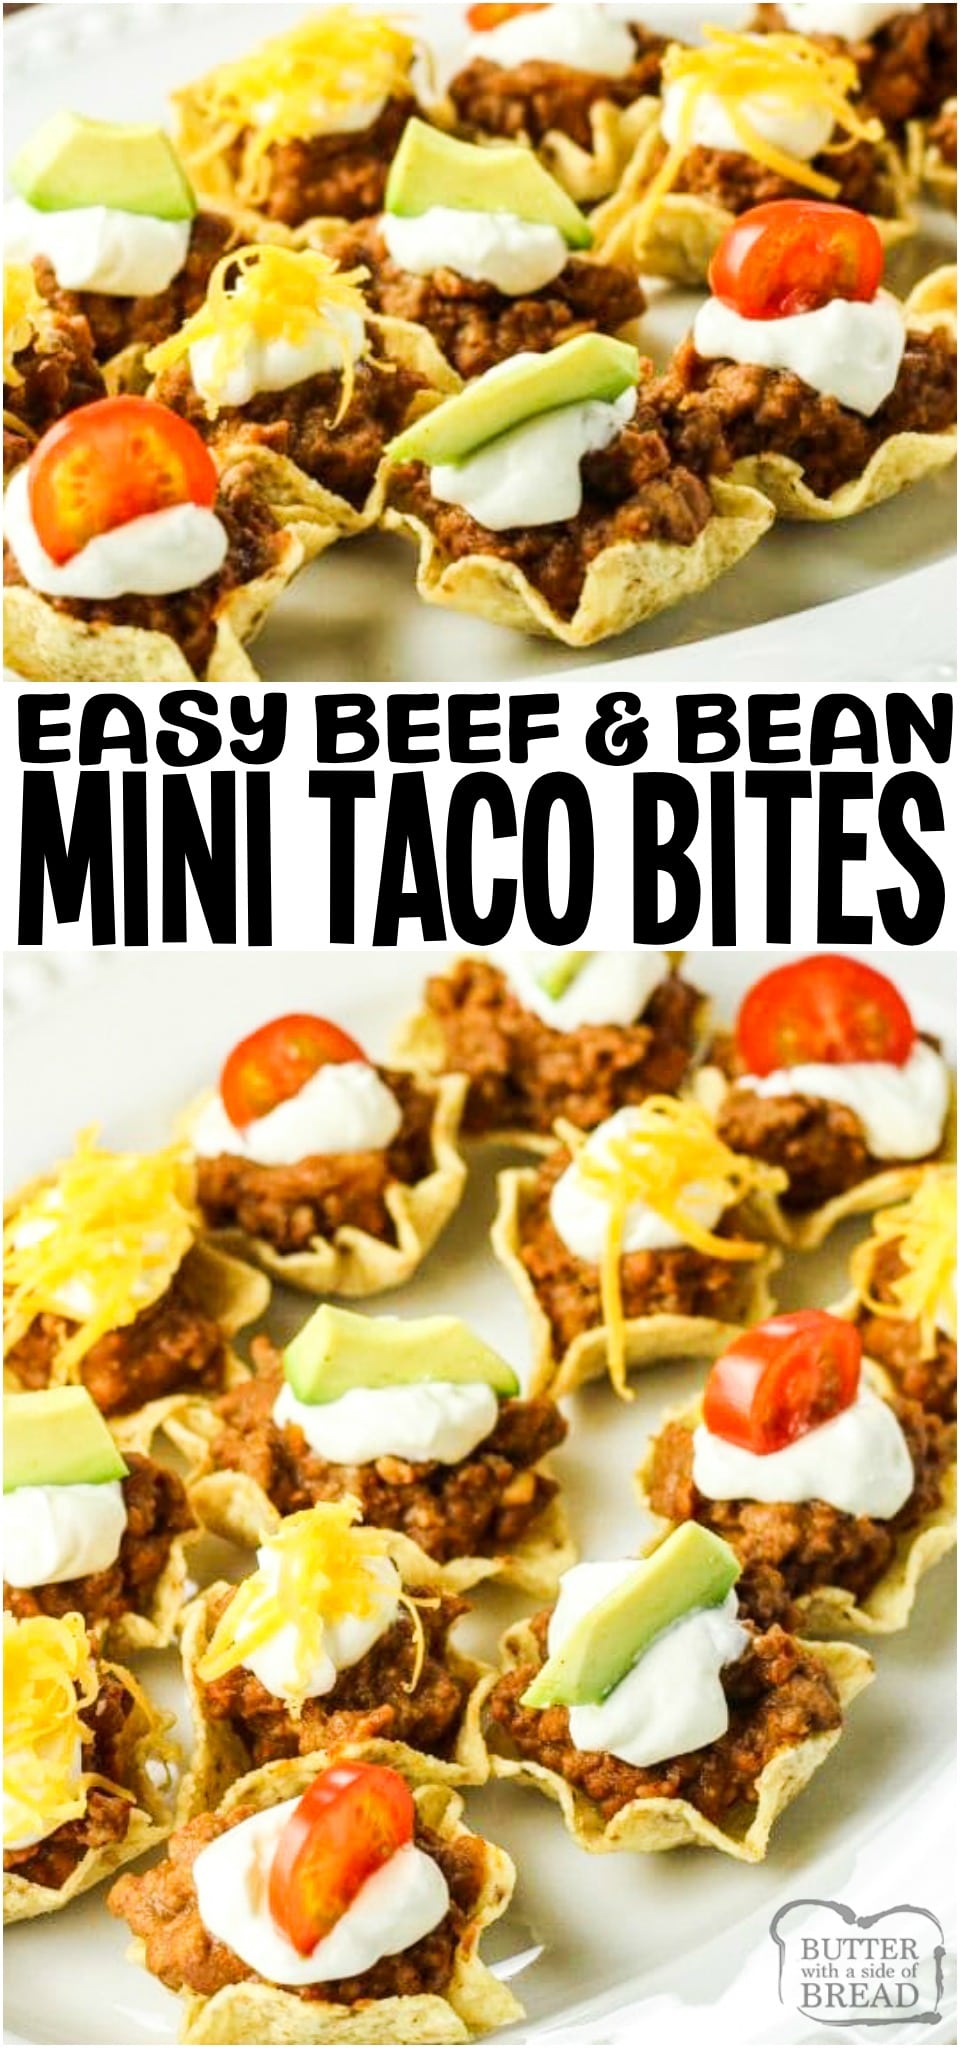 Taco Bites are tortilla chips filled with a combination of ground beef, refried beans and taco seasoning topped off with your favorite toppings. These mini taco bites are perfect to serve as an appetizer or a fun family meal. #tacos #beef #bean #cheese #appetizer #minitacos from BUTTER WITH A SIDE OF BREAD